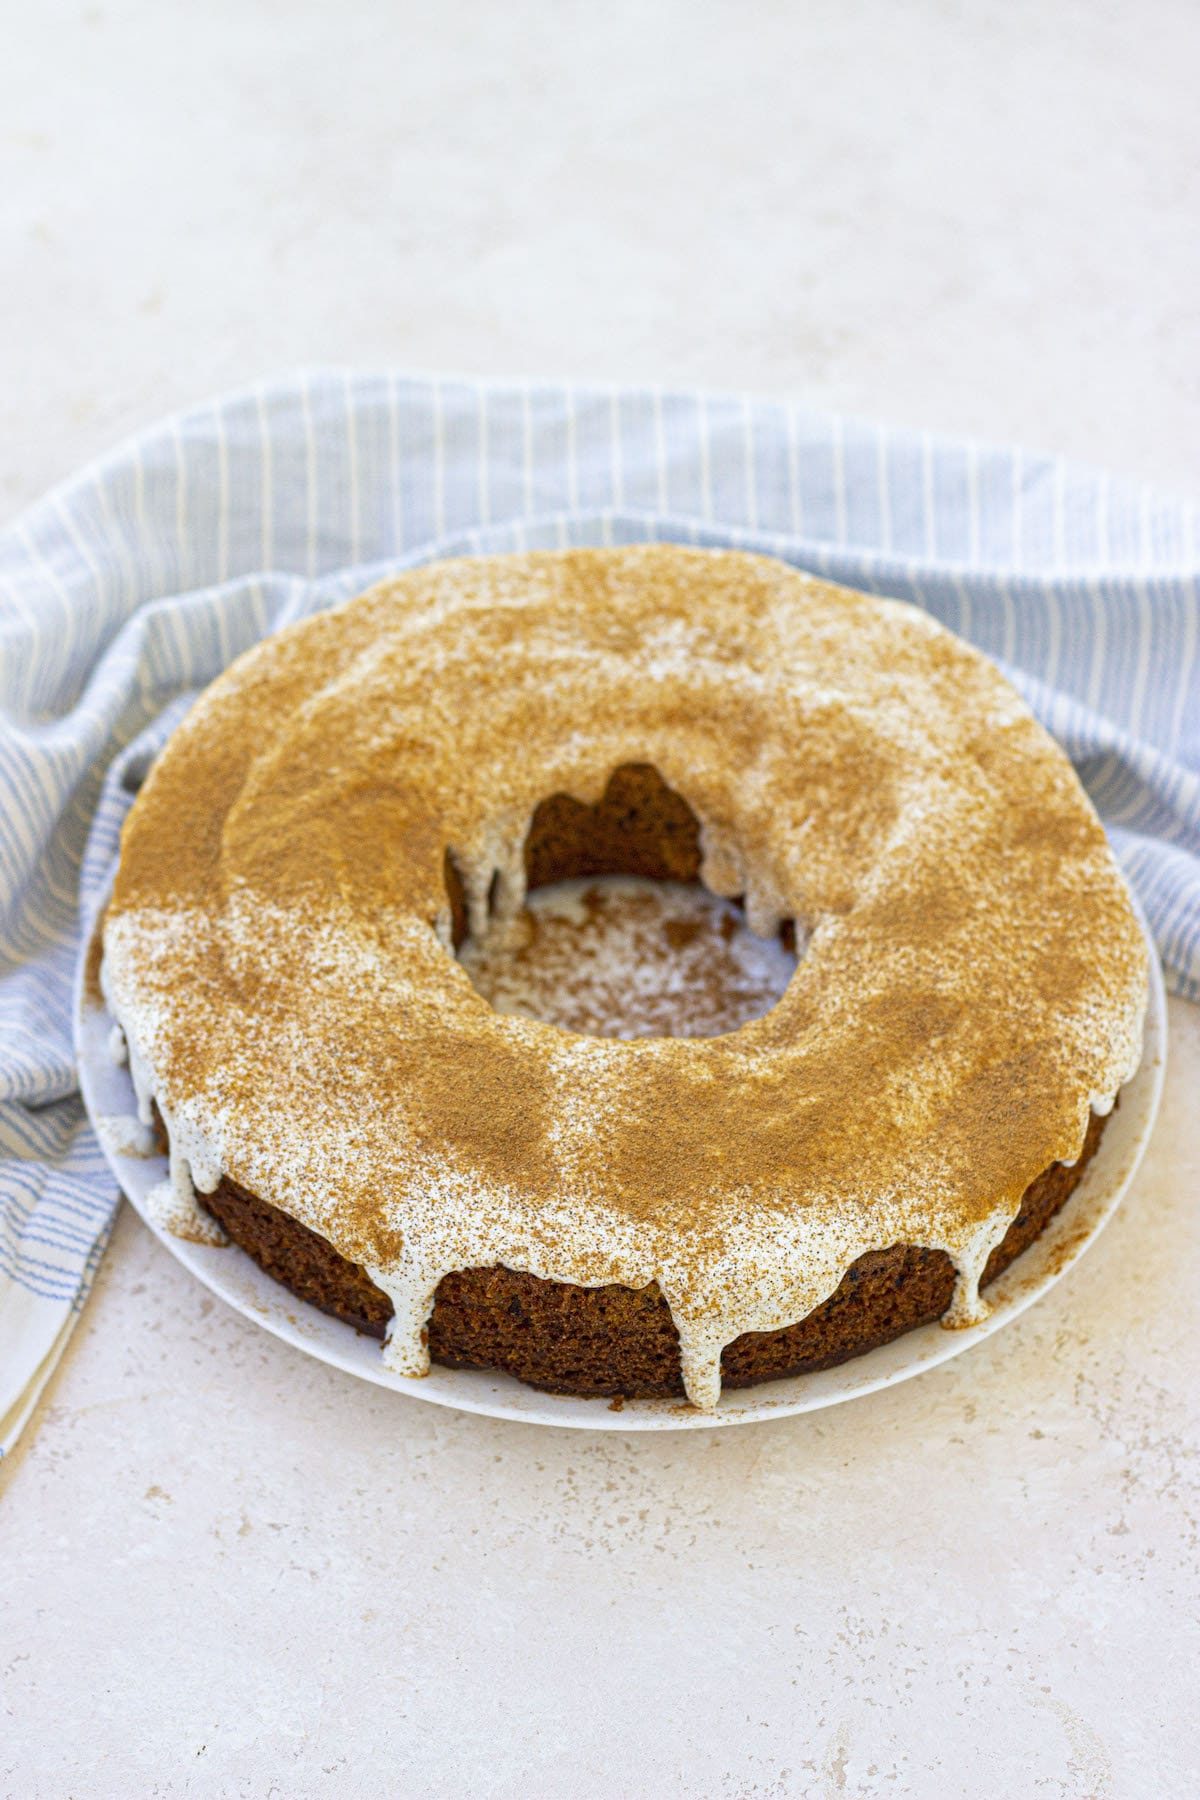 Sweet Potato Bundt Cake With Cream Cheese Frosting